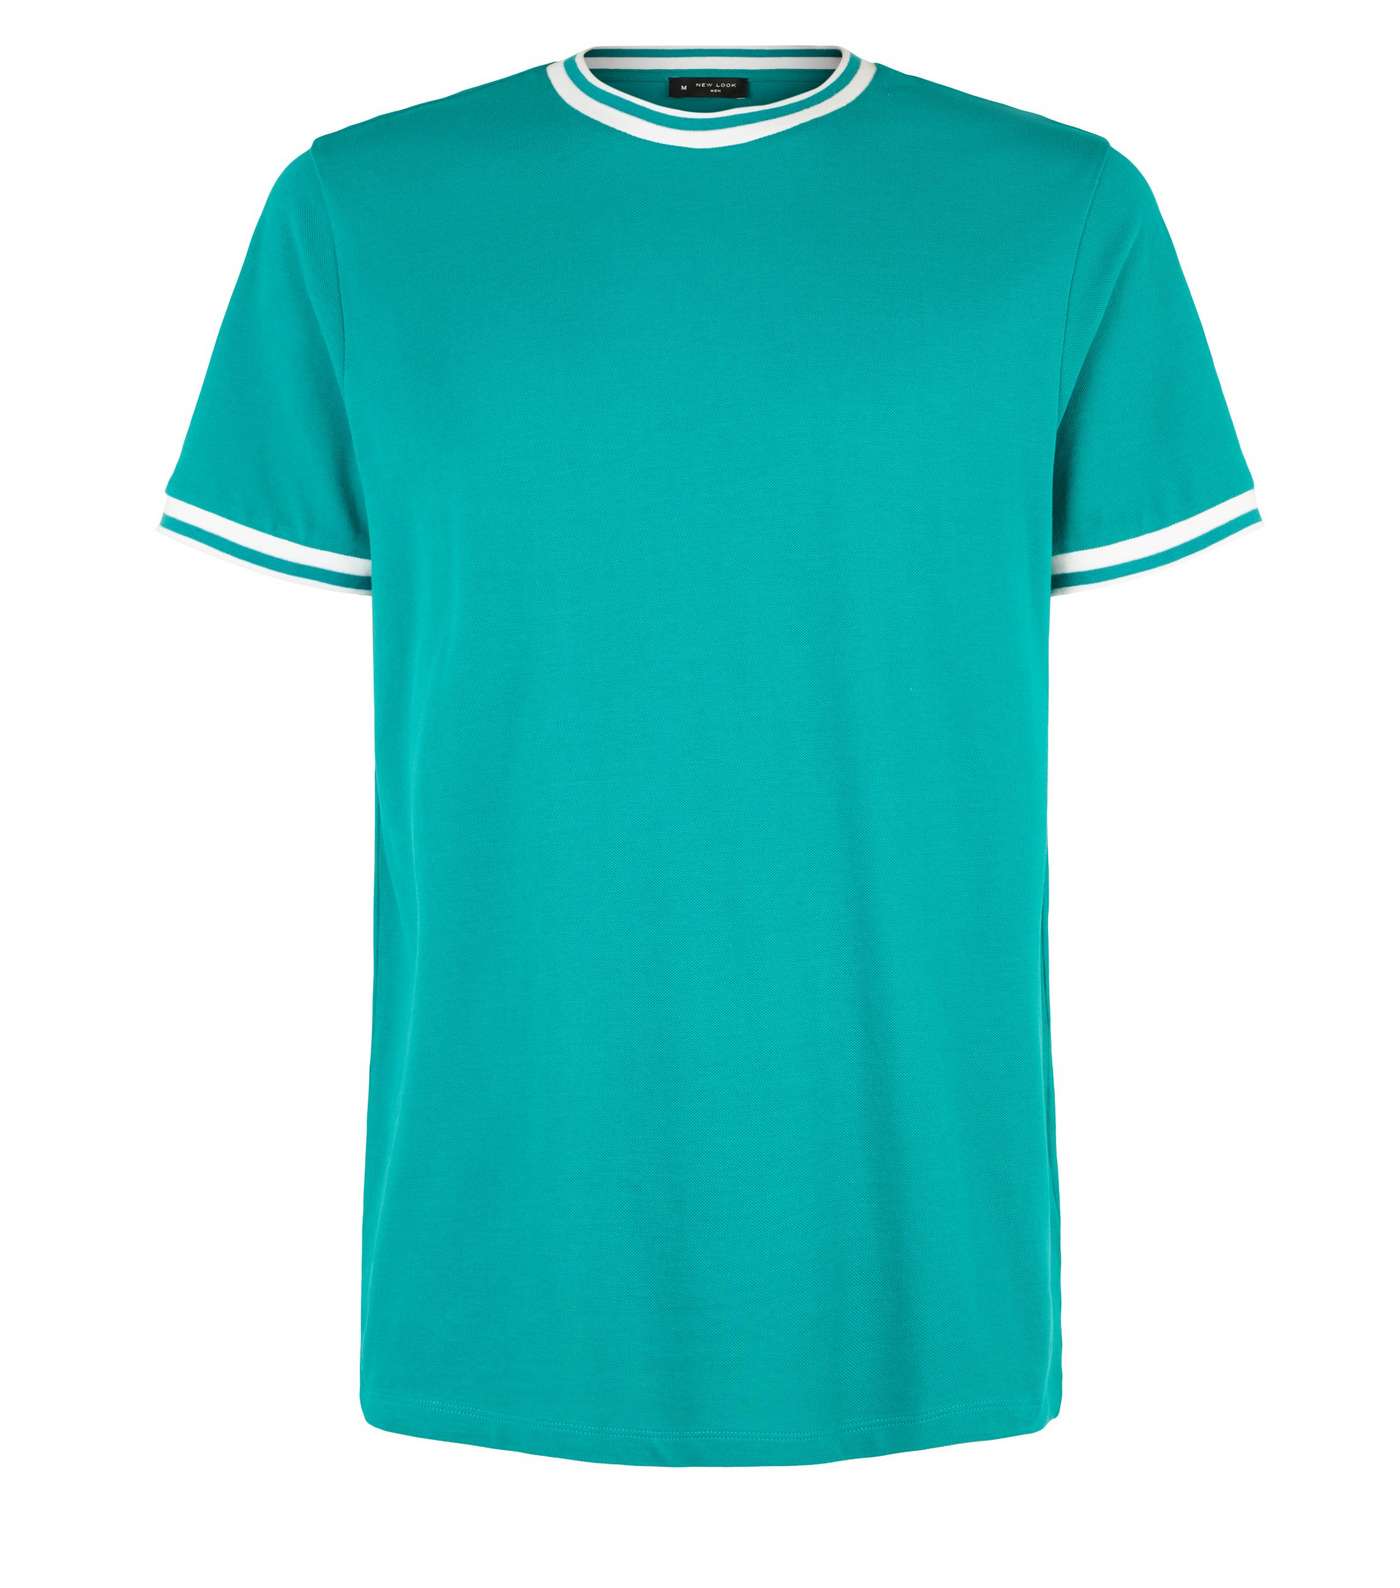 Teal Tipped Pique T-Shirt Image 4